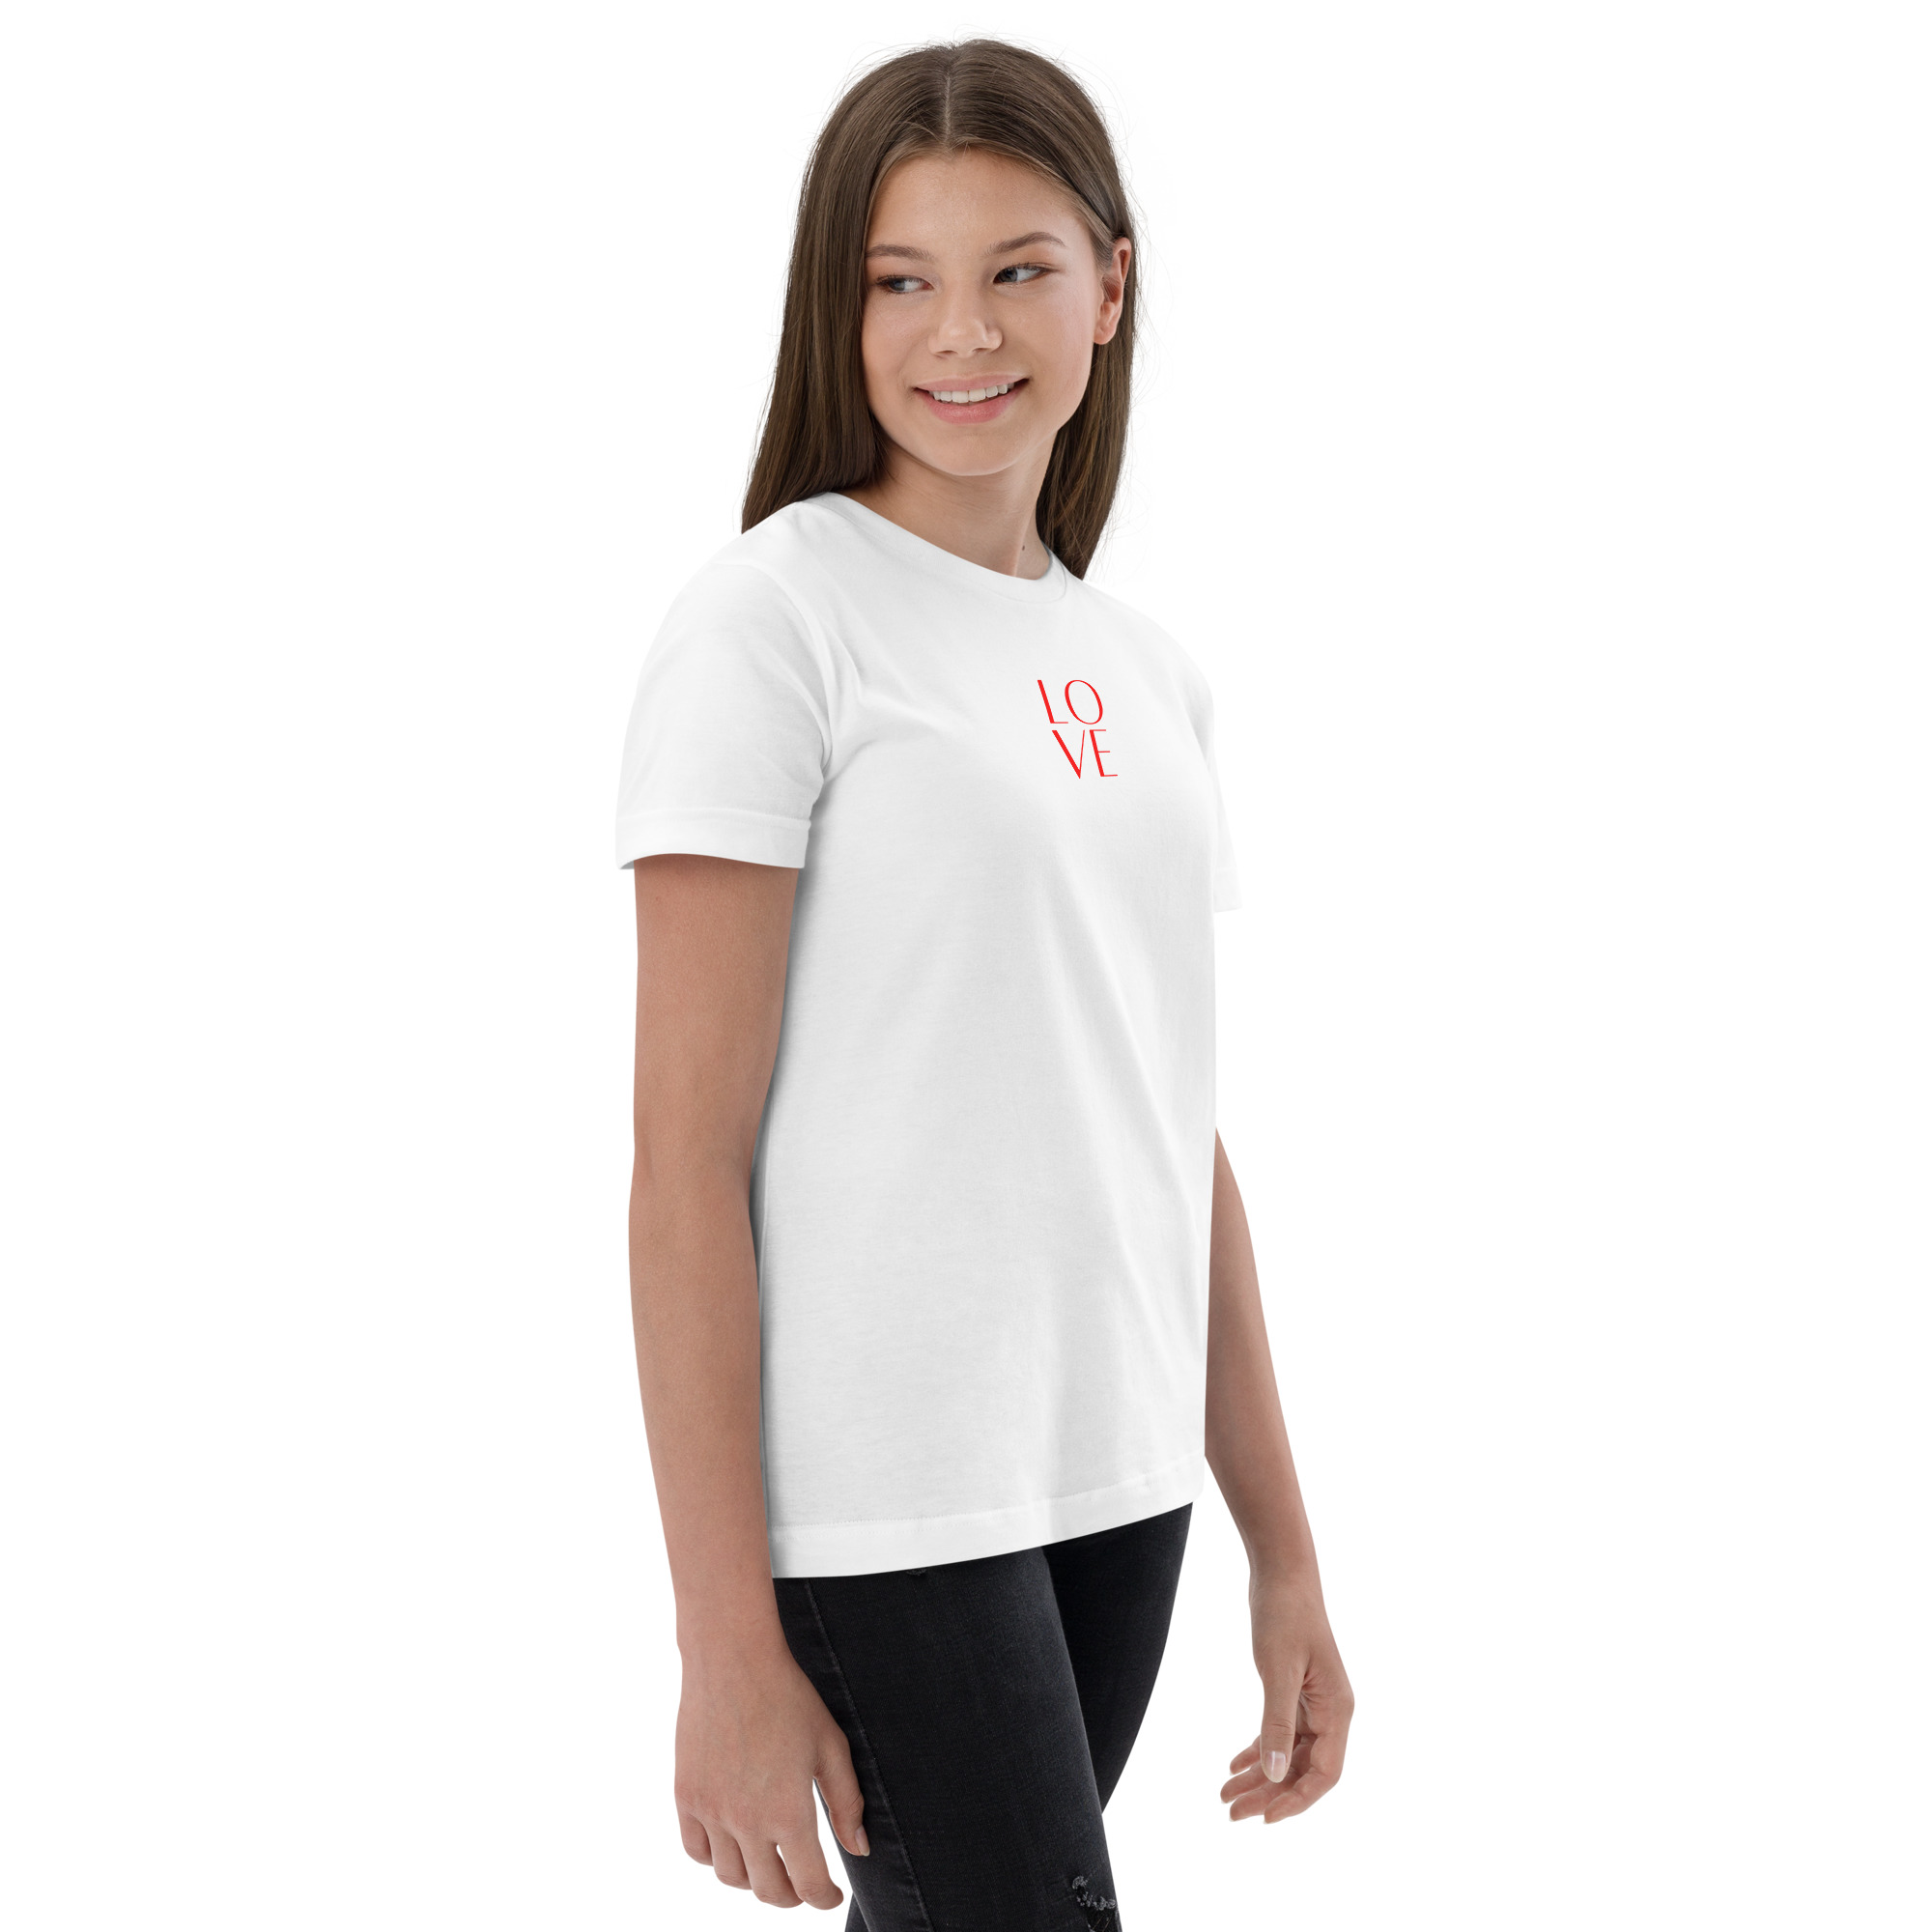 youth-jersey-t-shirt-white-right-front-6384cb2a1e1b8.jpg